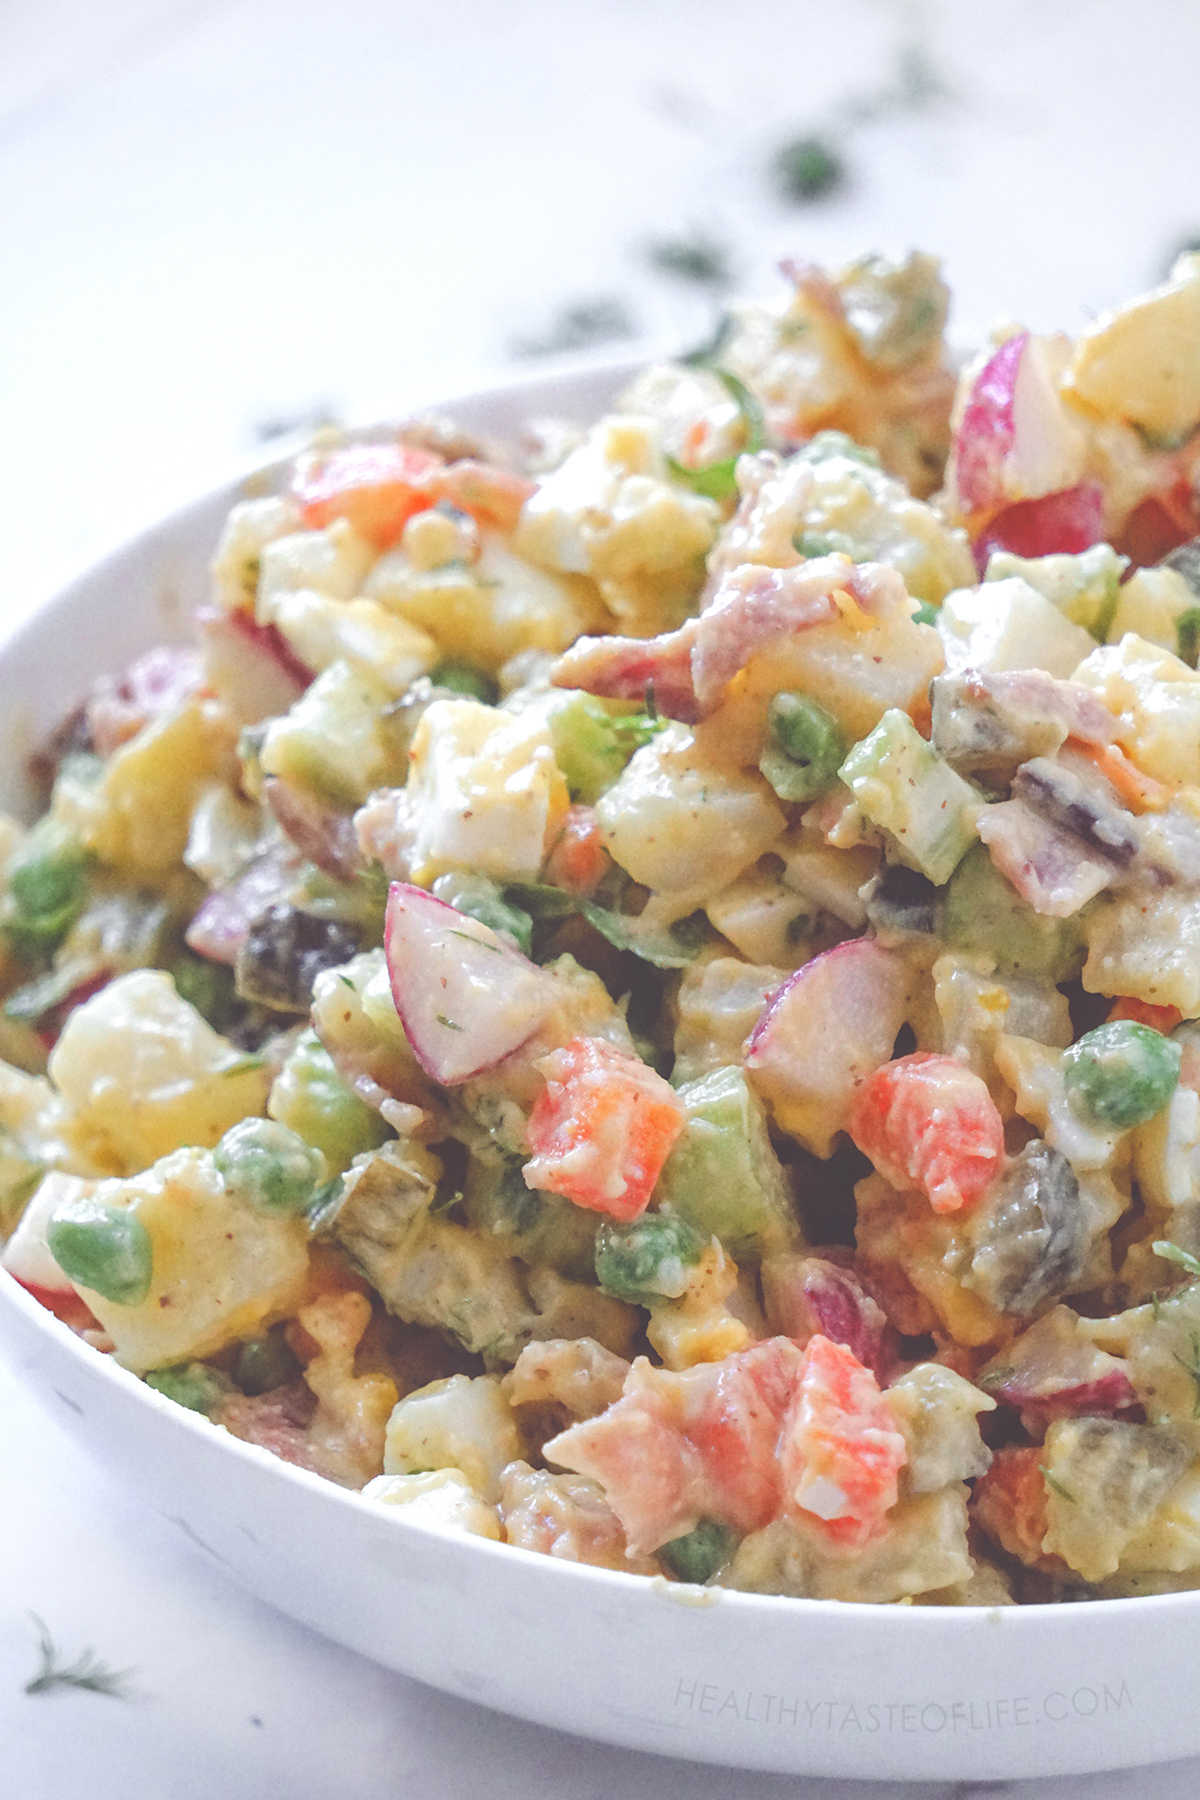 Potato salad made with cubed cooked potatoes, carrots, eggs, raw radishes, peas and celery, bacon (optional) with a creamy mayo free dressing. Similar To Olivier salad.